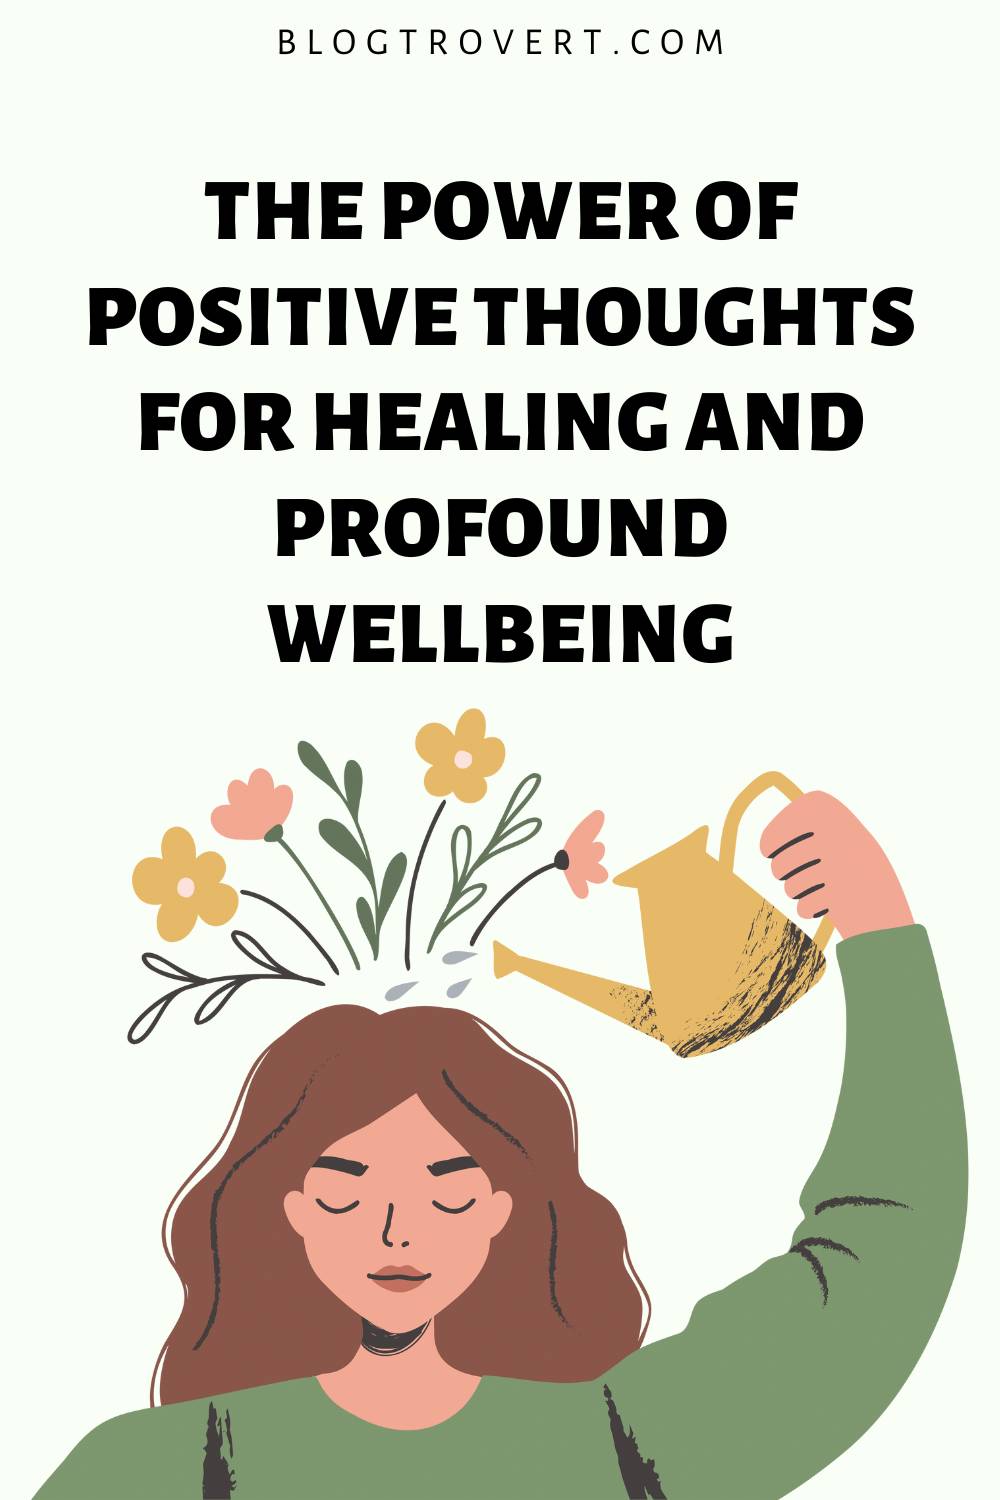 The power of positive thoughts for healing and profound wellbeing 4